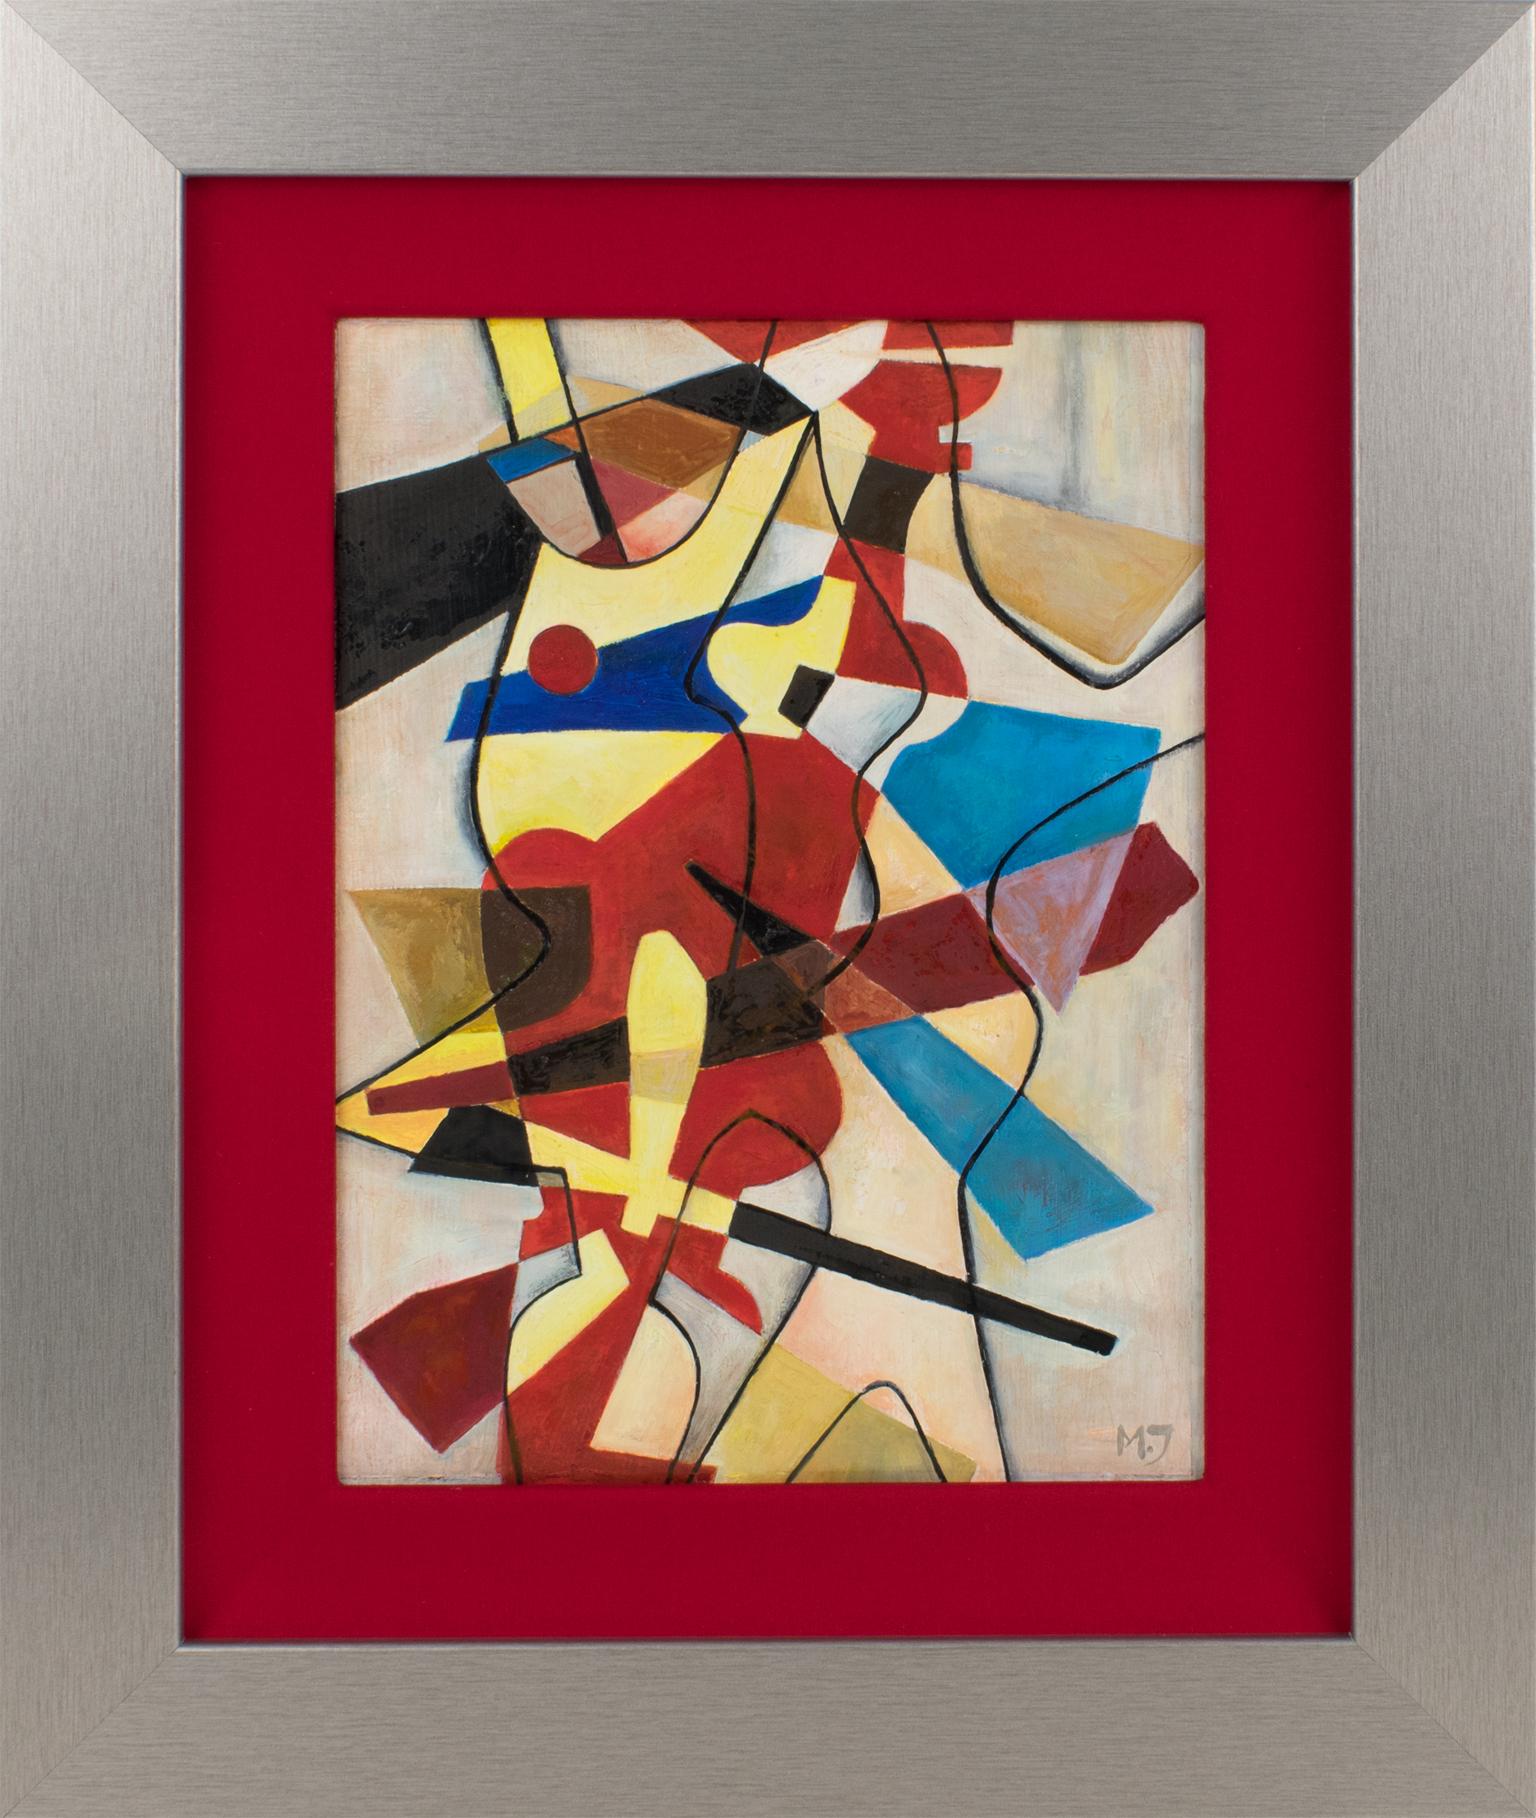 Colorful Abstract Cubist Oil Painting by Monogram MJ